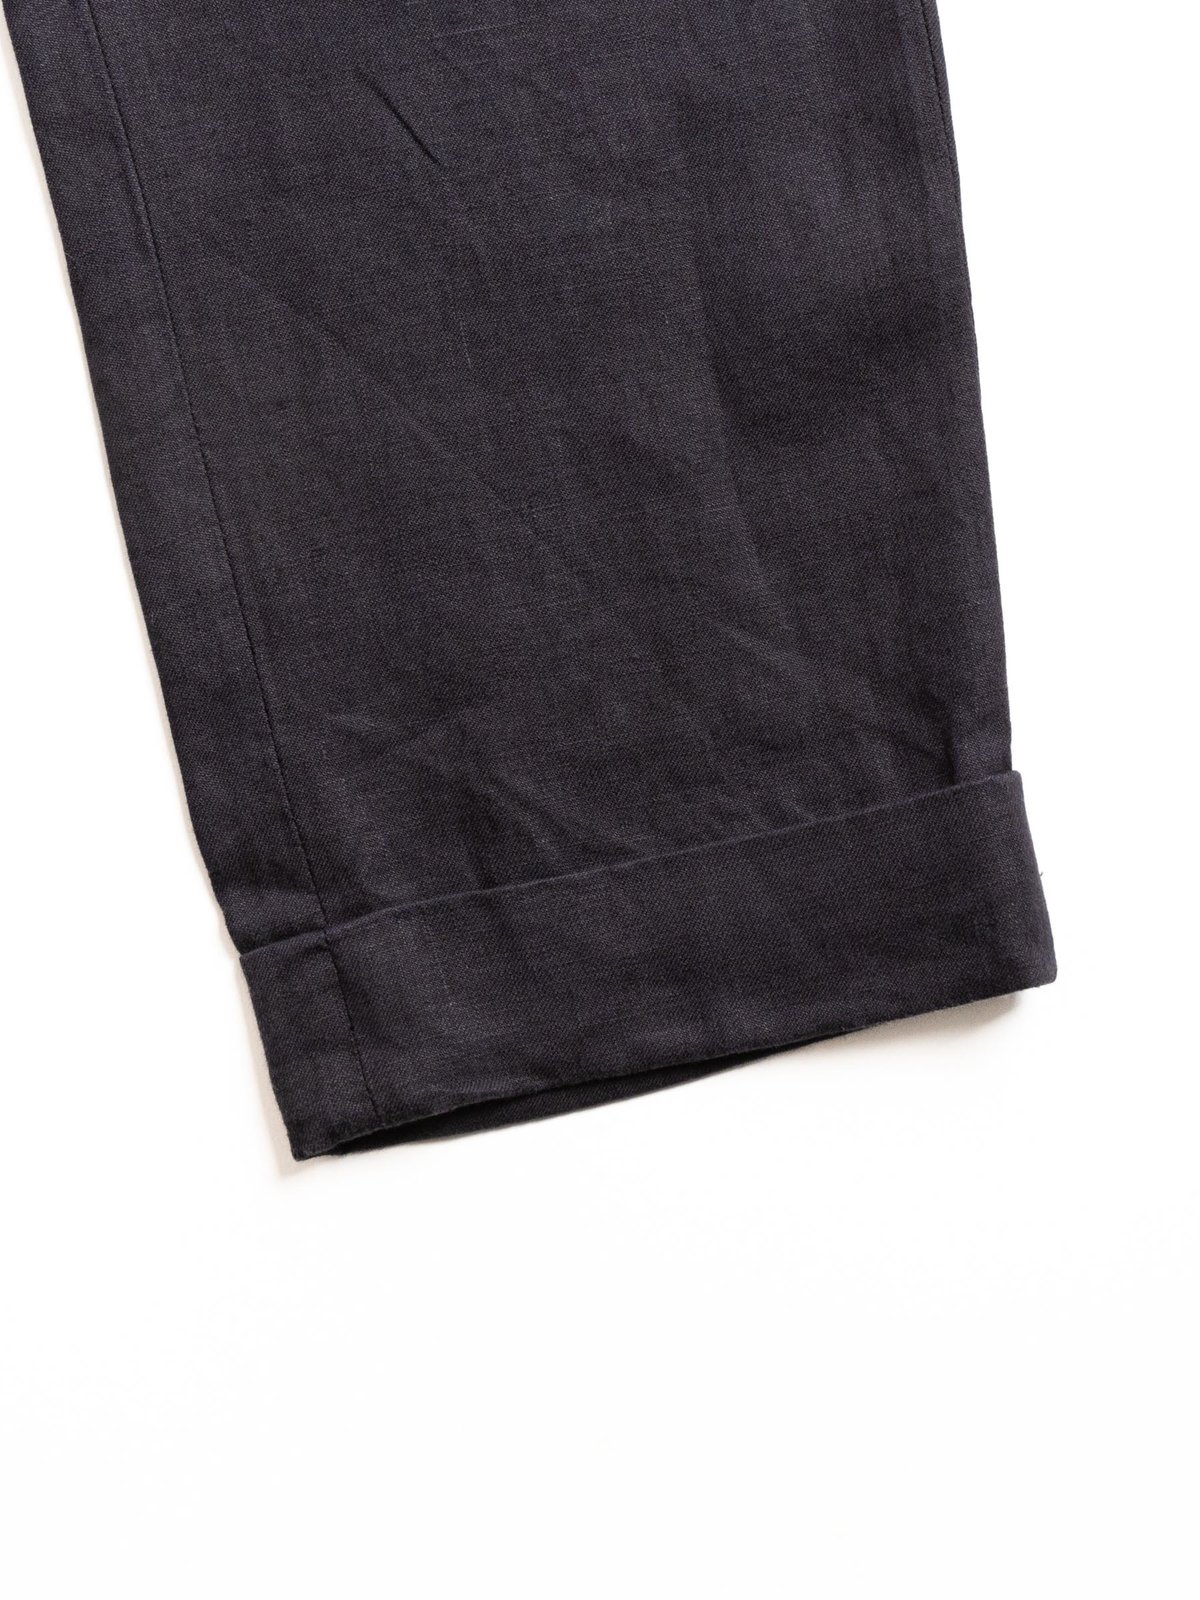 ANDOVER PANT NAVY LINEN TWILL - Image 4